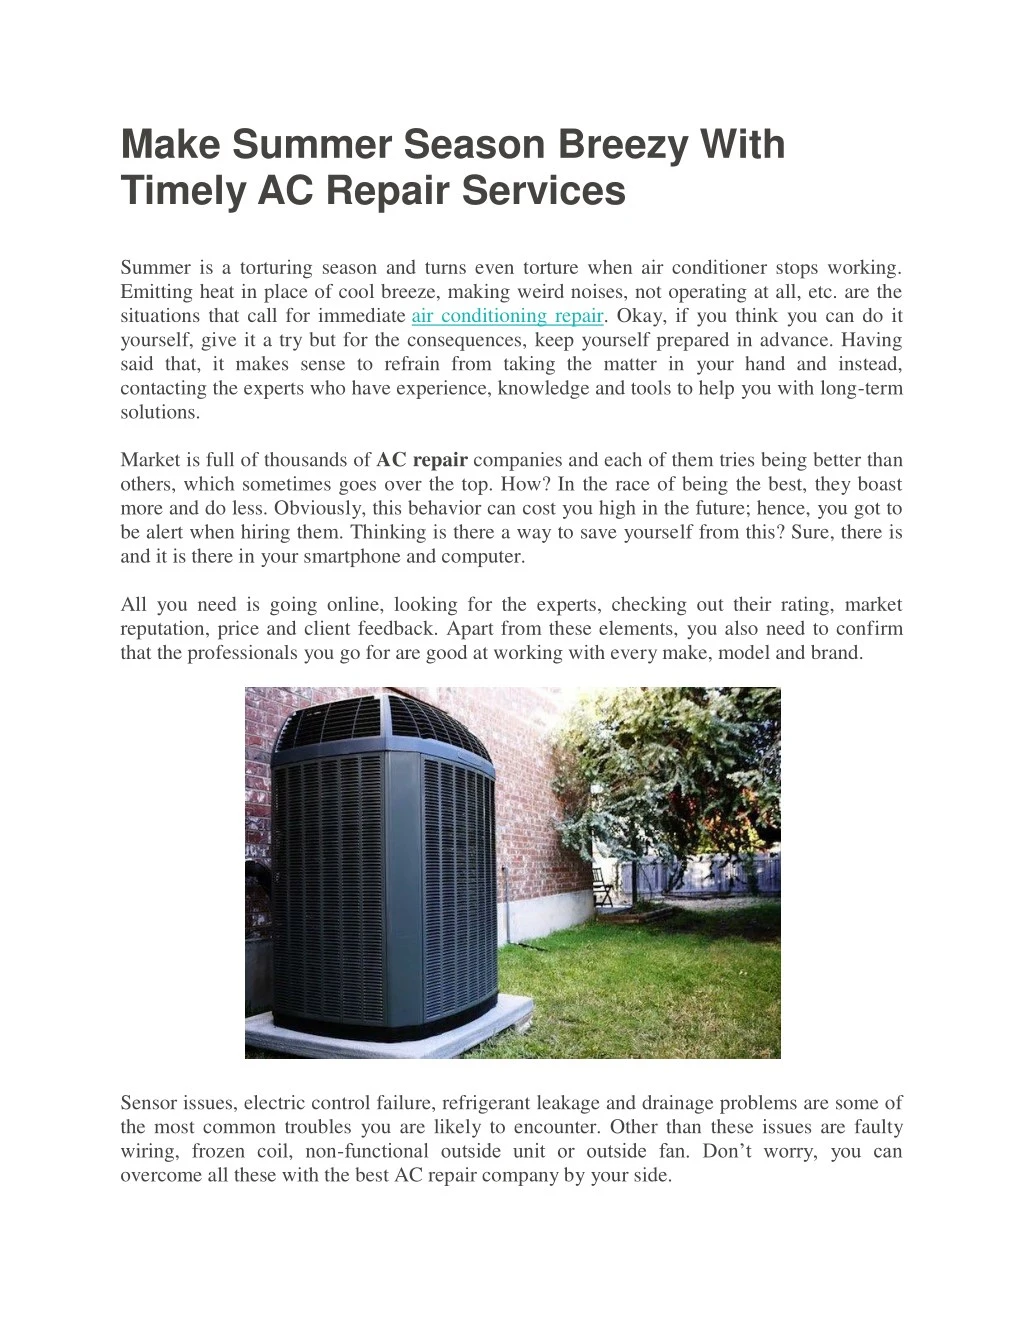 make summer season breezy with timely ac repair